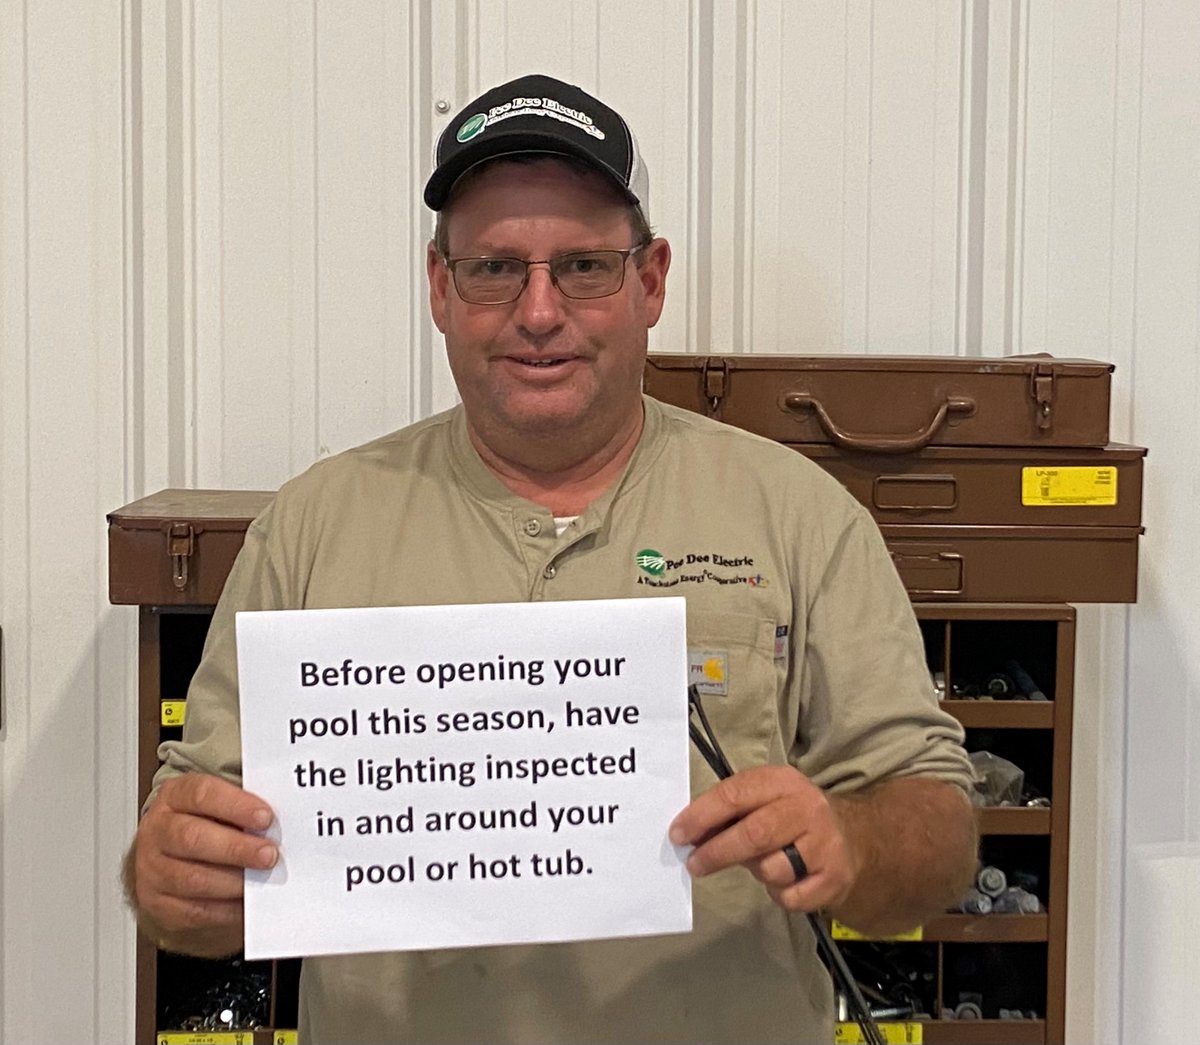 Have a hot tub or opening a pool this summer?  Pee Dee's Vegetation Management Specialist, Scott Simmons, reminds us to have the lighting inspected in and around our pools and hot tubs. #ElectricalSafetyMonth #PoweringABrighterFuture #SafetyAtPeeDee